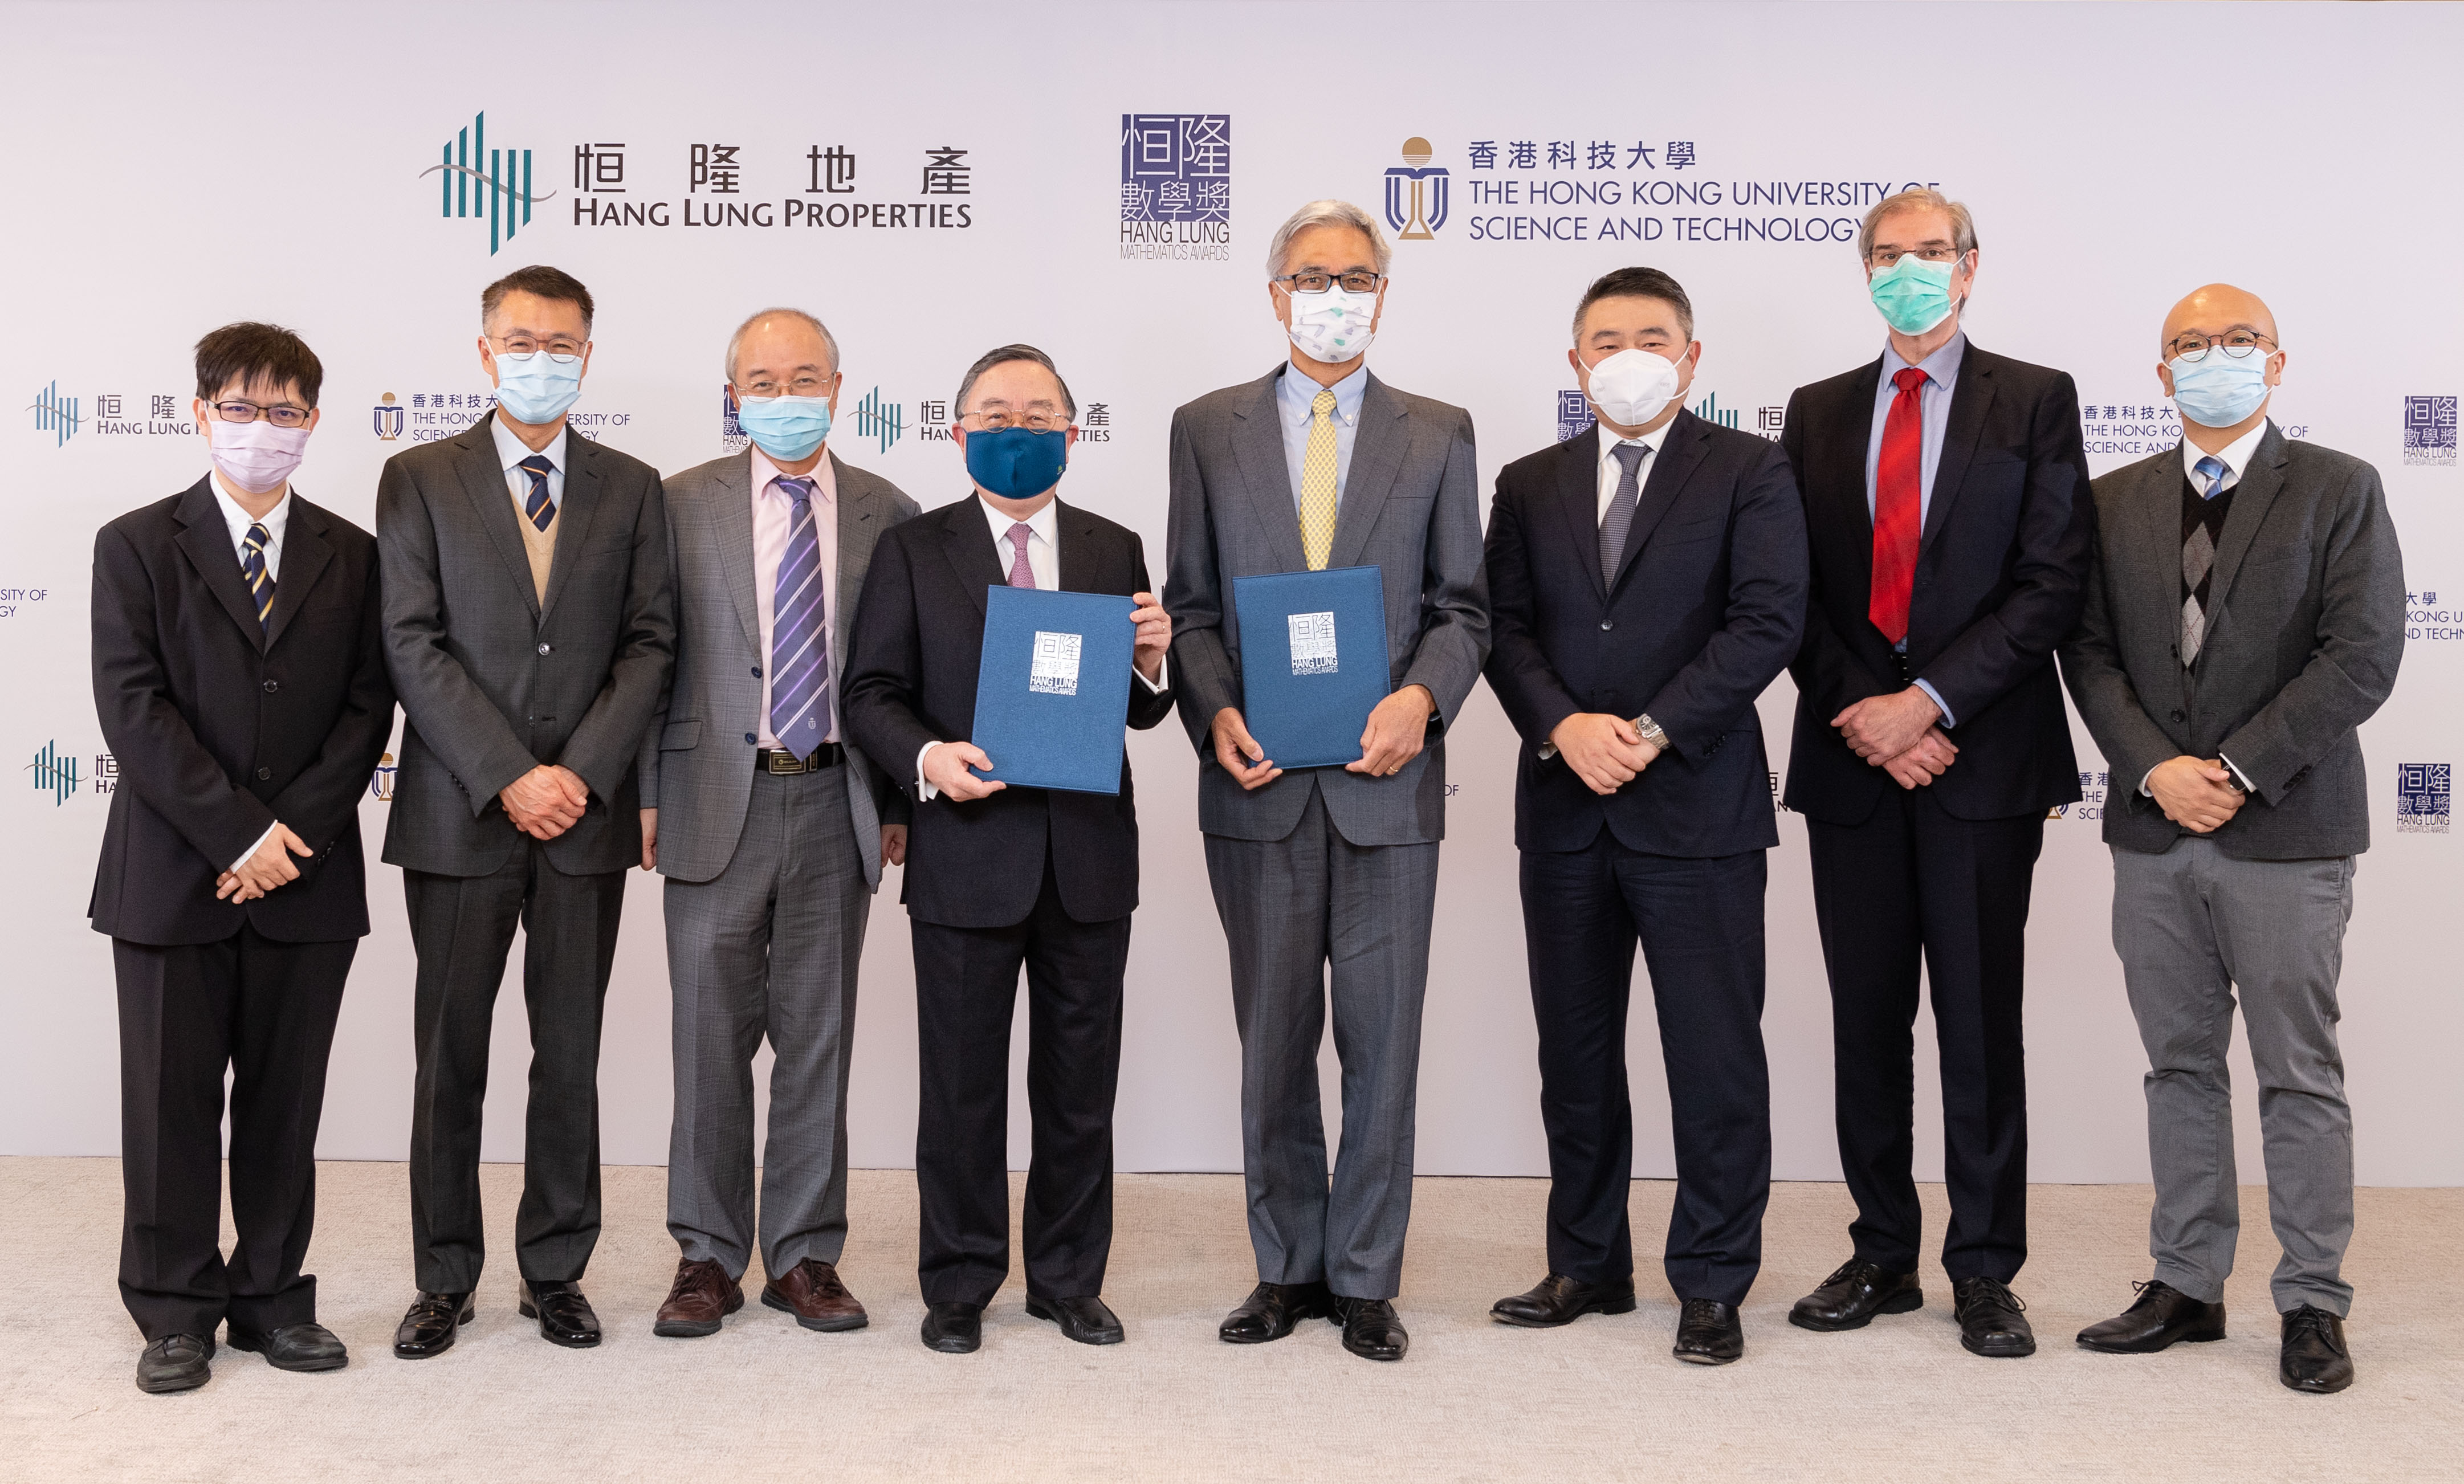 (From right to left) Prof. Tim LEUNG, Professor, Department of Mathematics, HKUST, Prof. Andrew COHEN, Lam Woo Foundation Professor, Director of HKUST Jockey Club Institute for Advanced Study and Acting Dean of Science, HKUST, Mr. Weber LO, Chief Executive Officer, Hang Lung Properties, Prof. Wei SHYY, President, HKUST, Mr. Ronnie C. CHAN, Chair, Hang Lung Properties, Prof. WANG Yang, Vice-President for Institutional Advancement, HKUST, Mr. HC HO, CFO, Hang Lung Properties, Prof. Frederick FONG, Assistant Professor, Department of Mathematics, HKUST